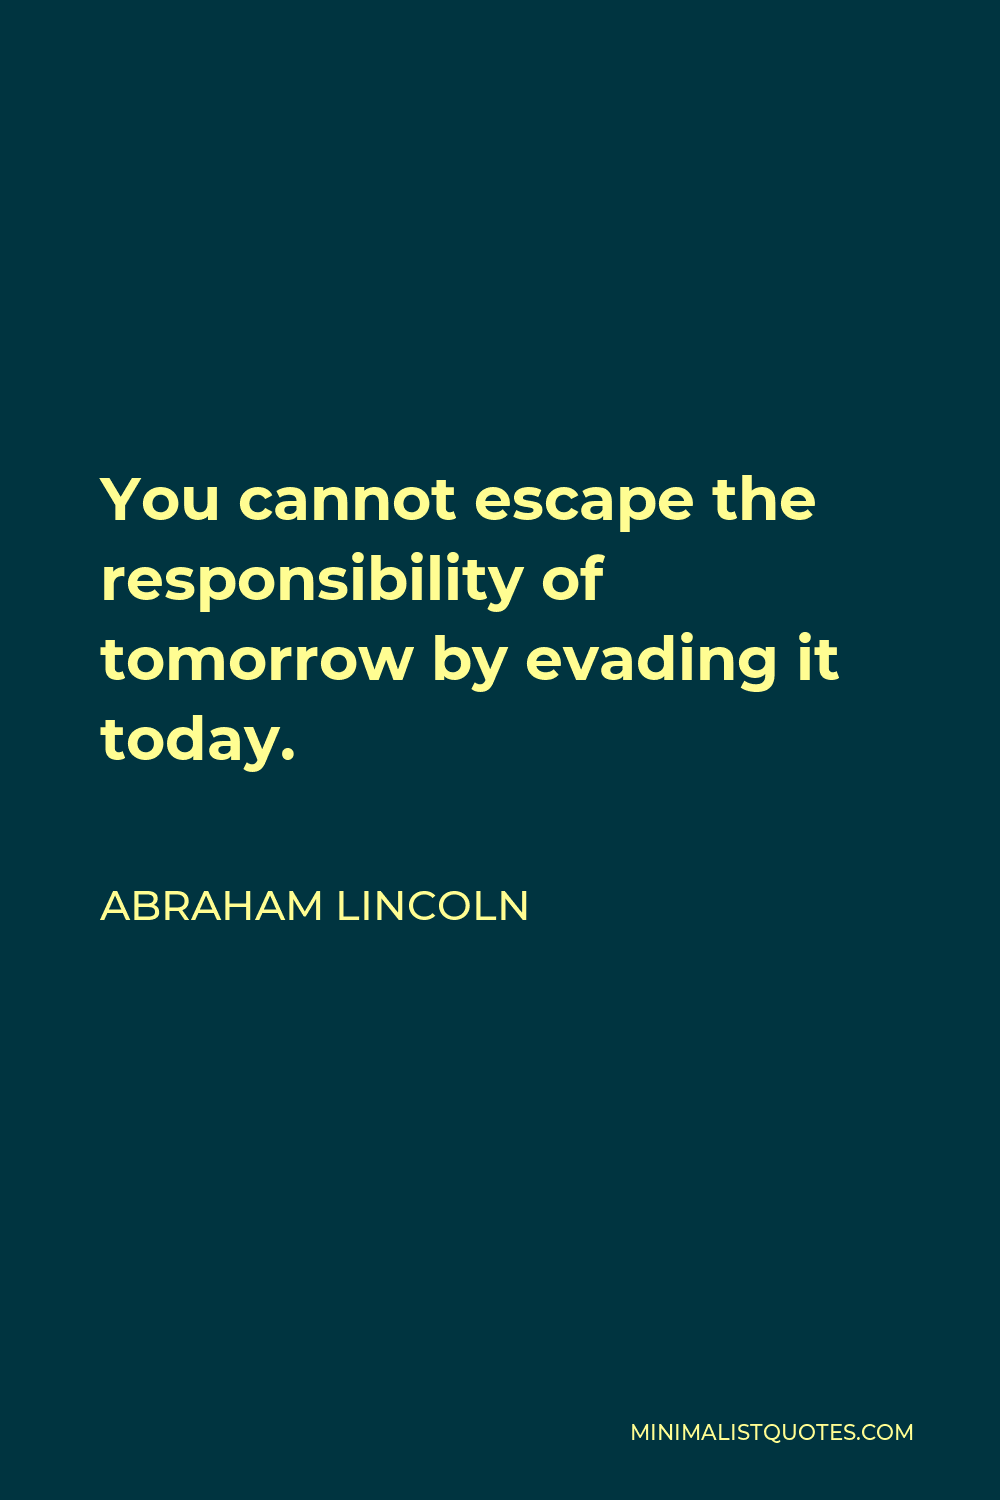 Abraham Lincoln Quote - You cannot escape the responsibility of tomorrow by evading it today.